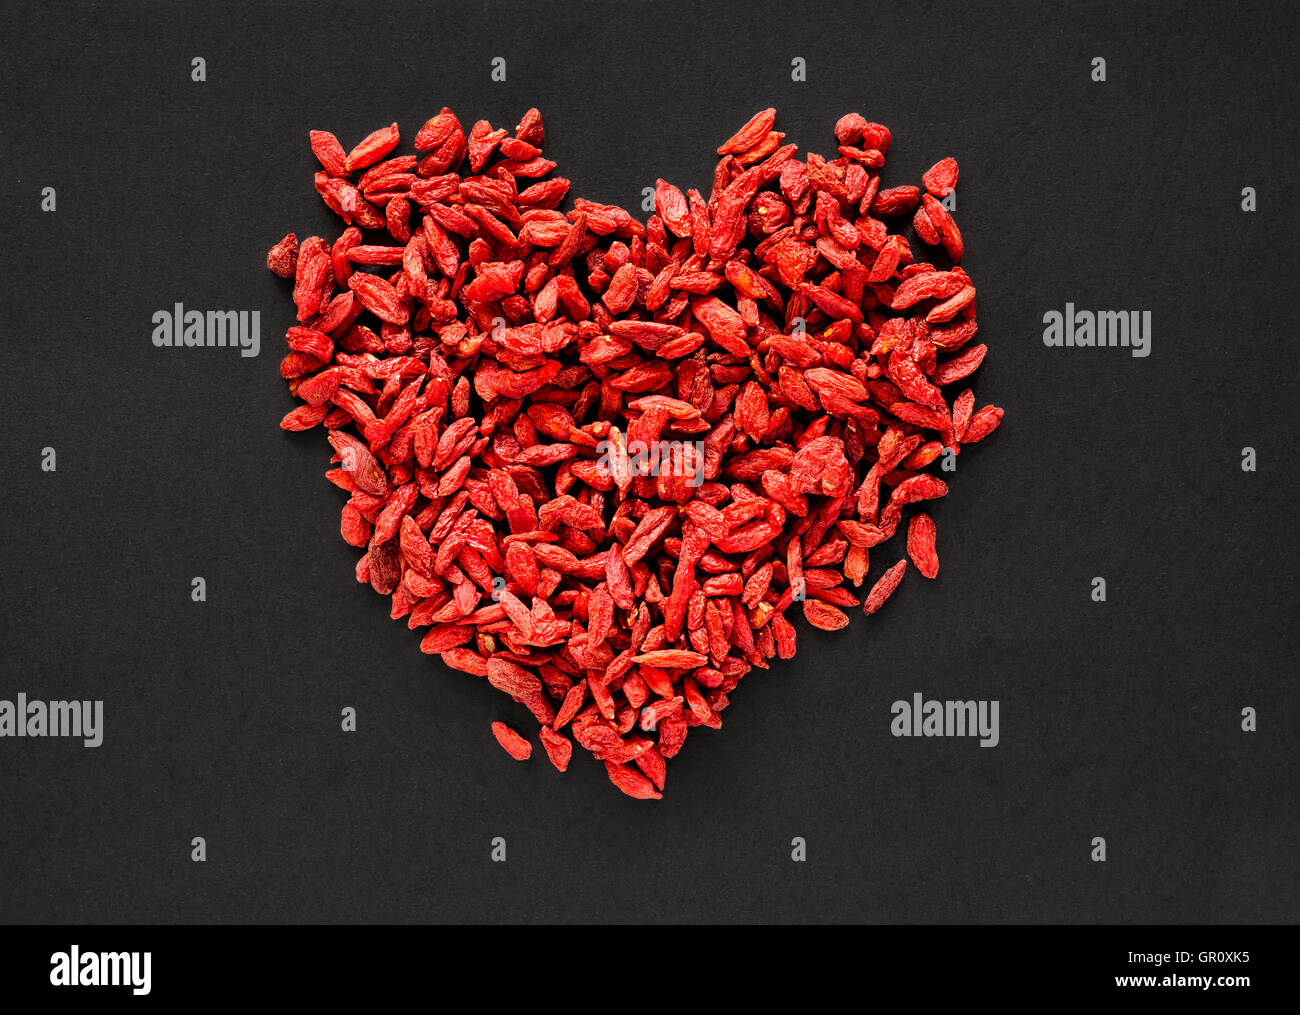 Raw dried goji berries arranged in a heart shape on a black background Stock Photo